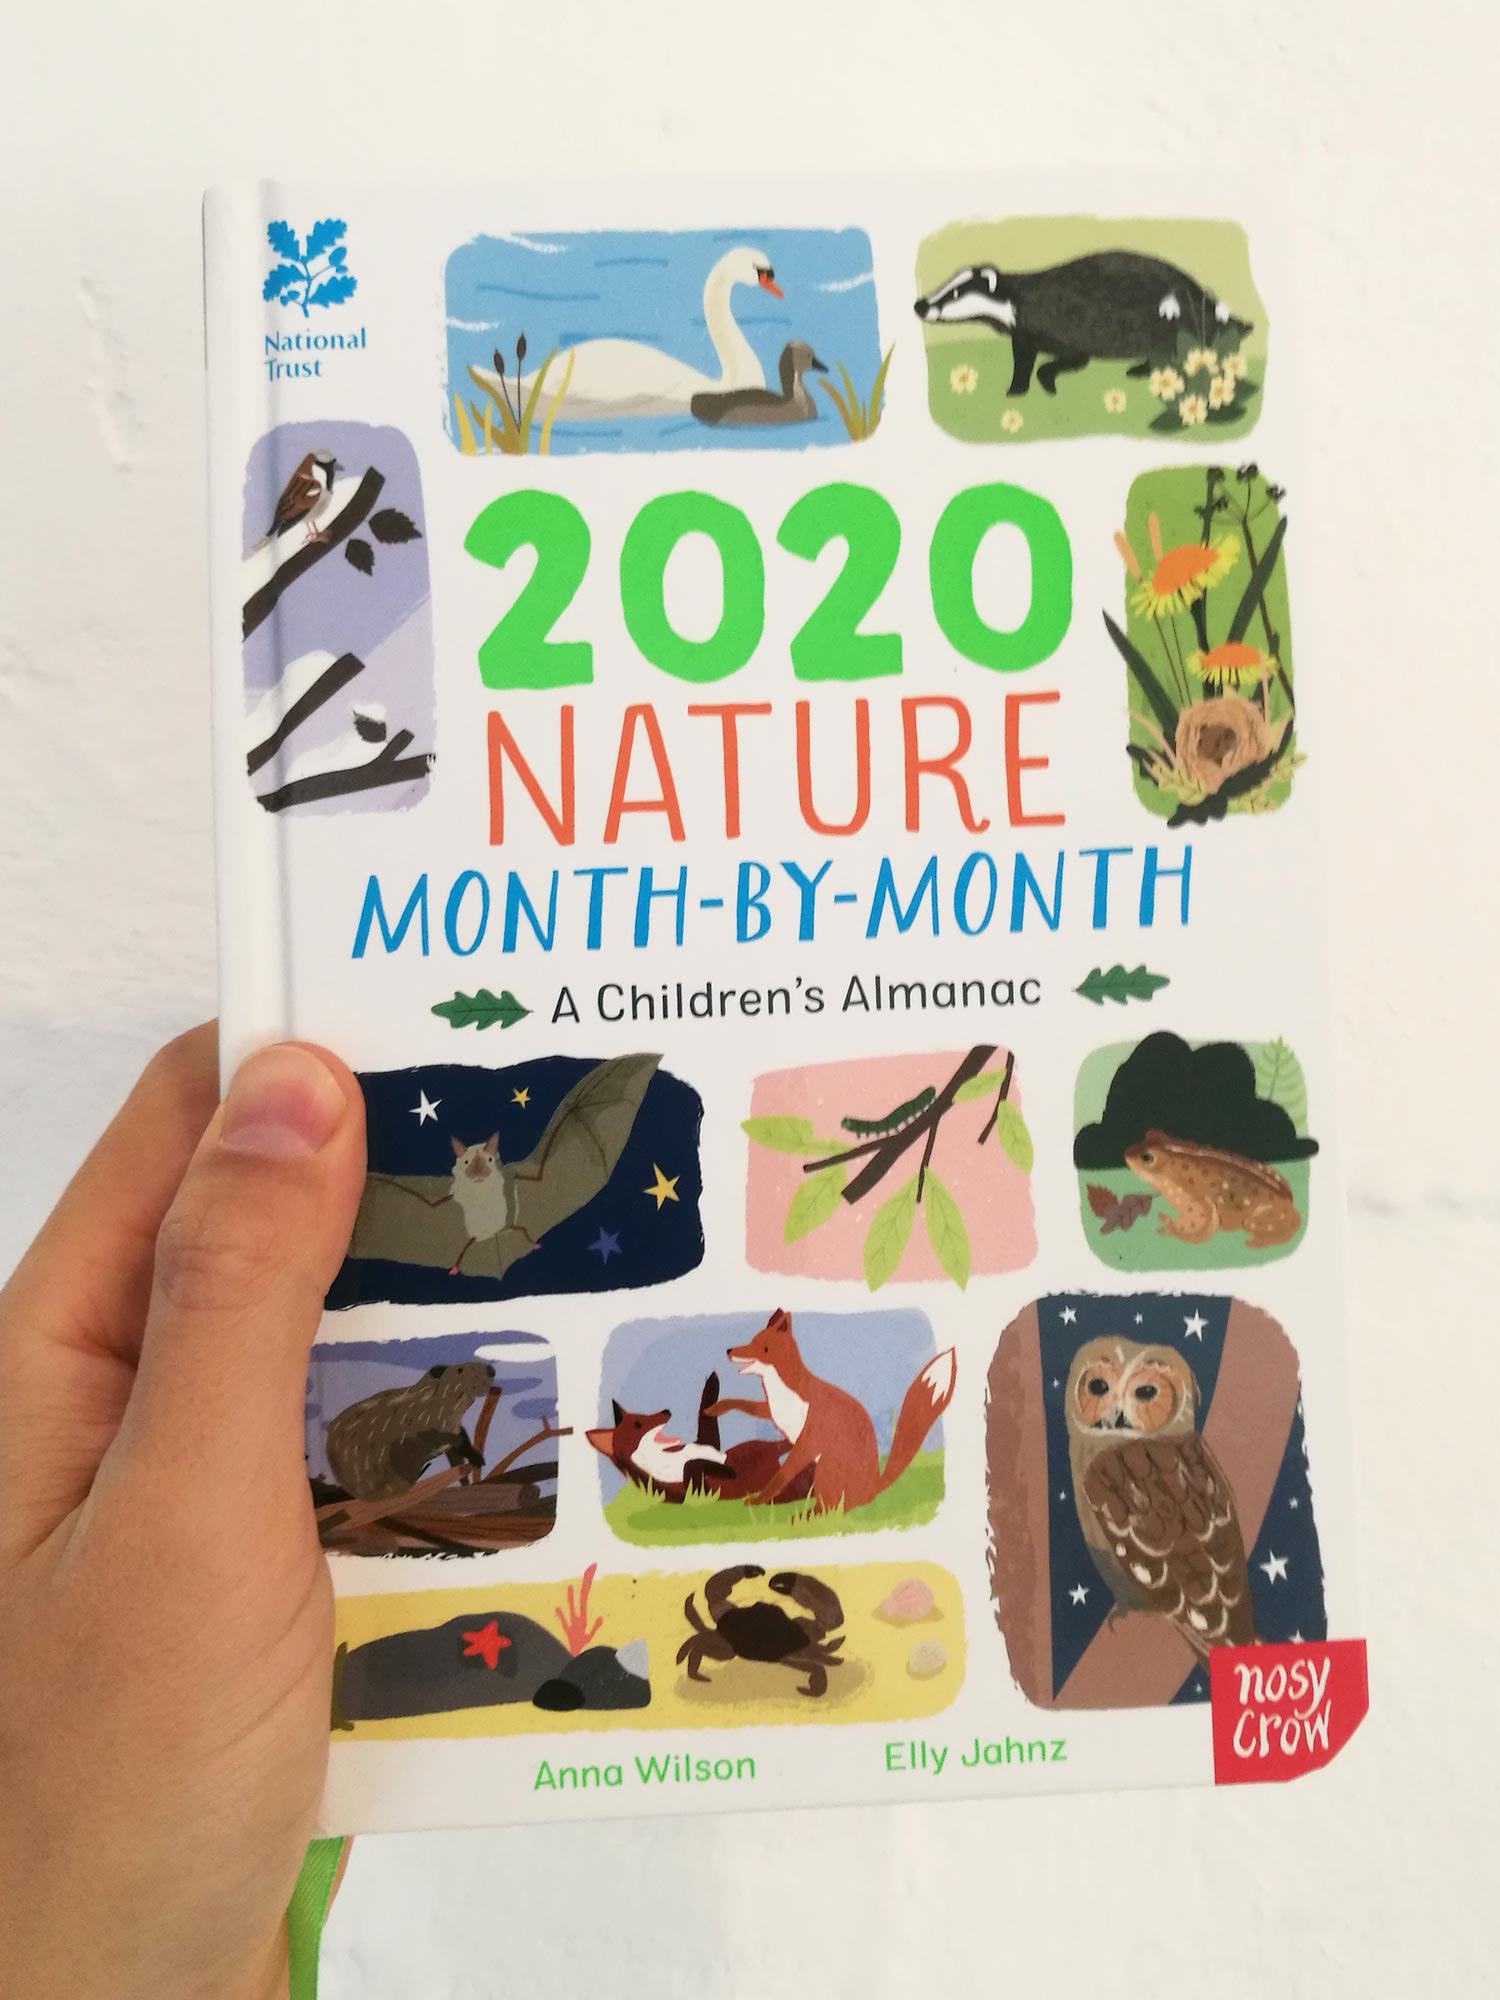 2020 Nature Month by Month illustrated by Elly Jahnz